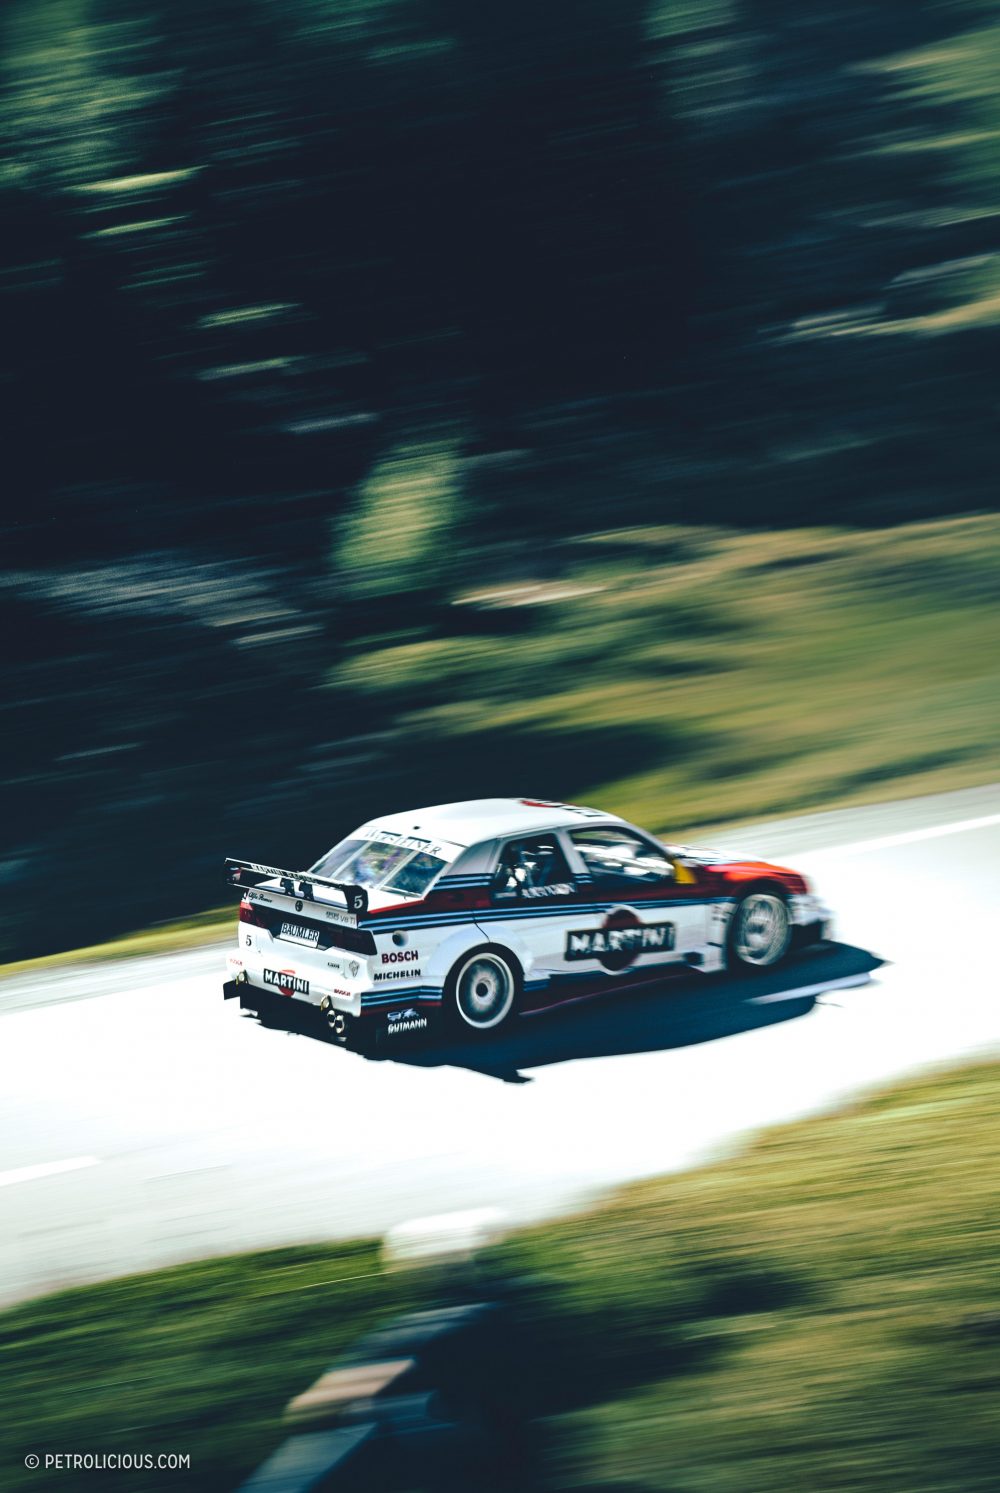 Italy's Greatest Touring Car: Experiencing The Alfa Romeo 155 V6 TI DTM High In The Swiss Alps • Petrolicious